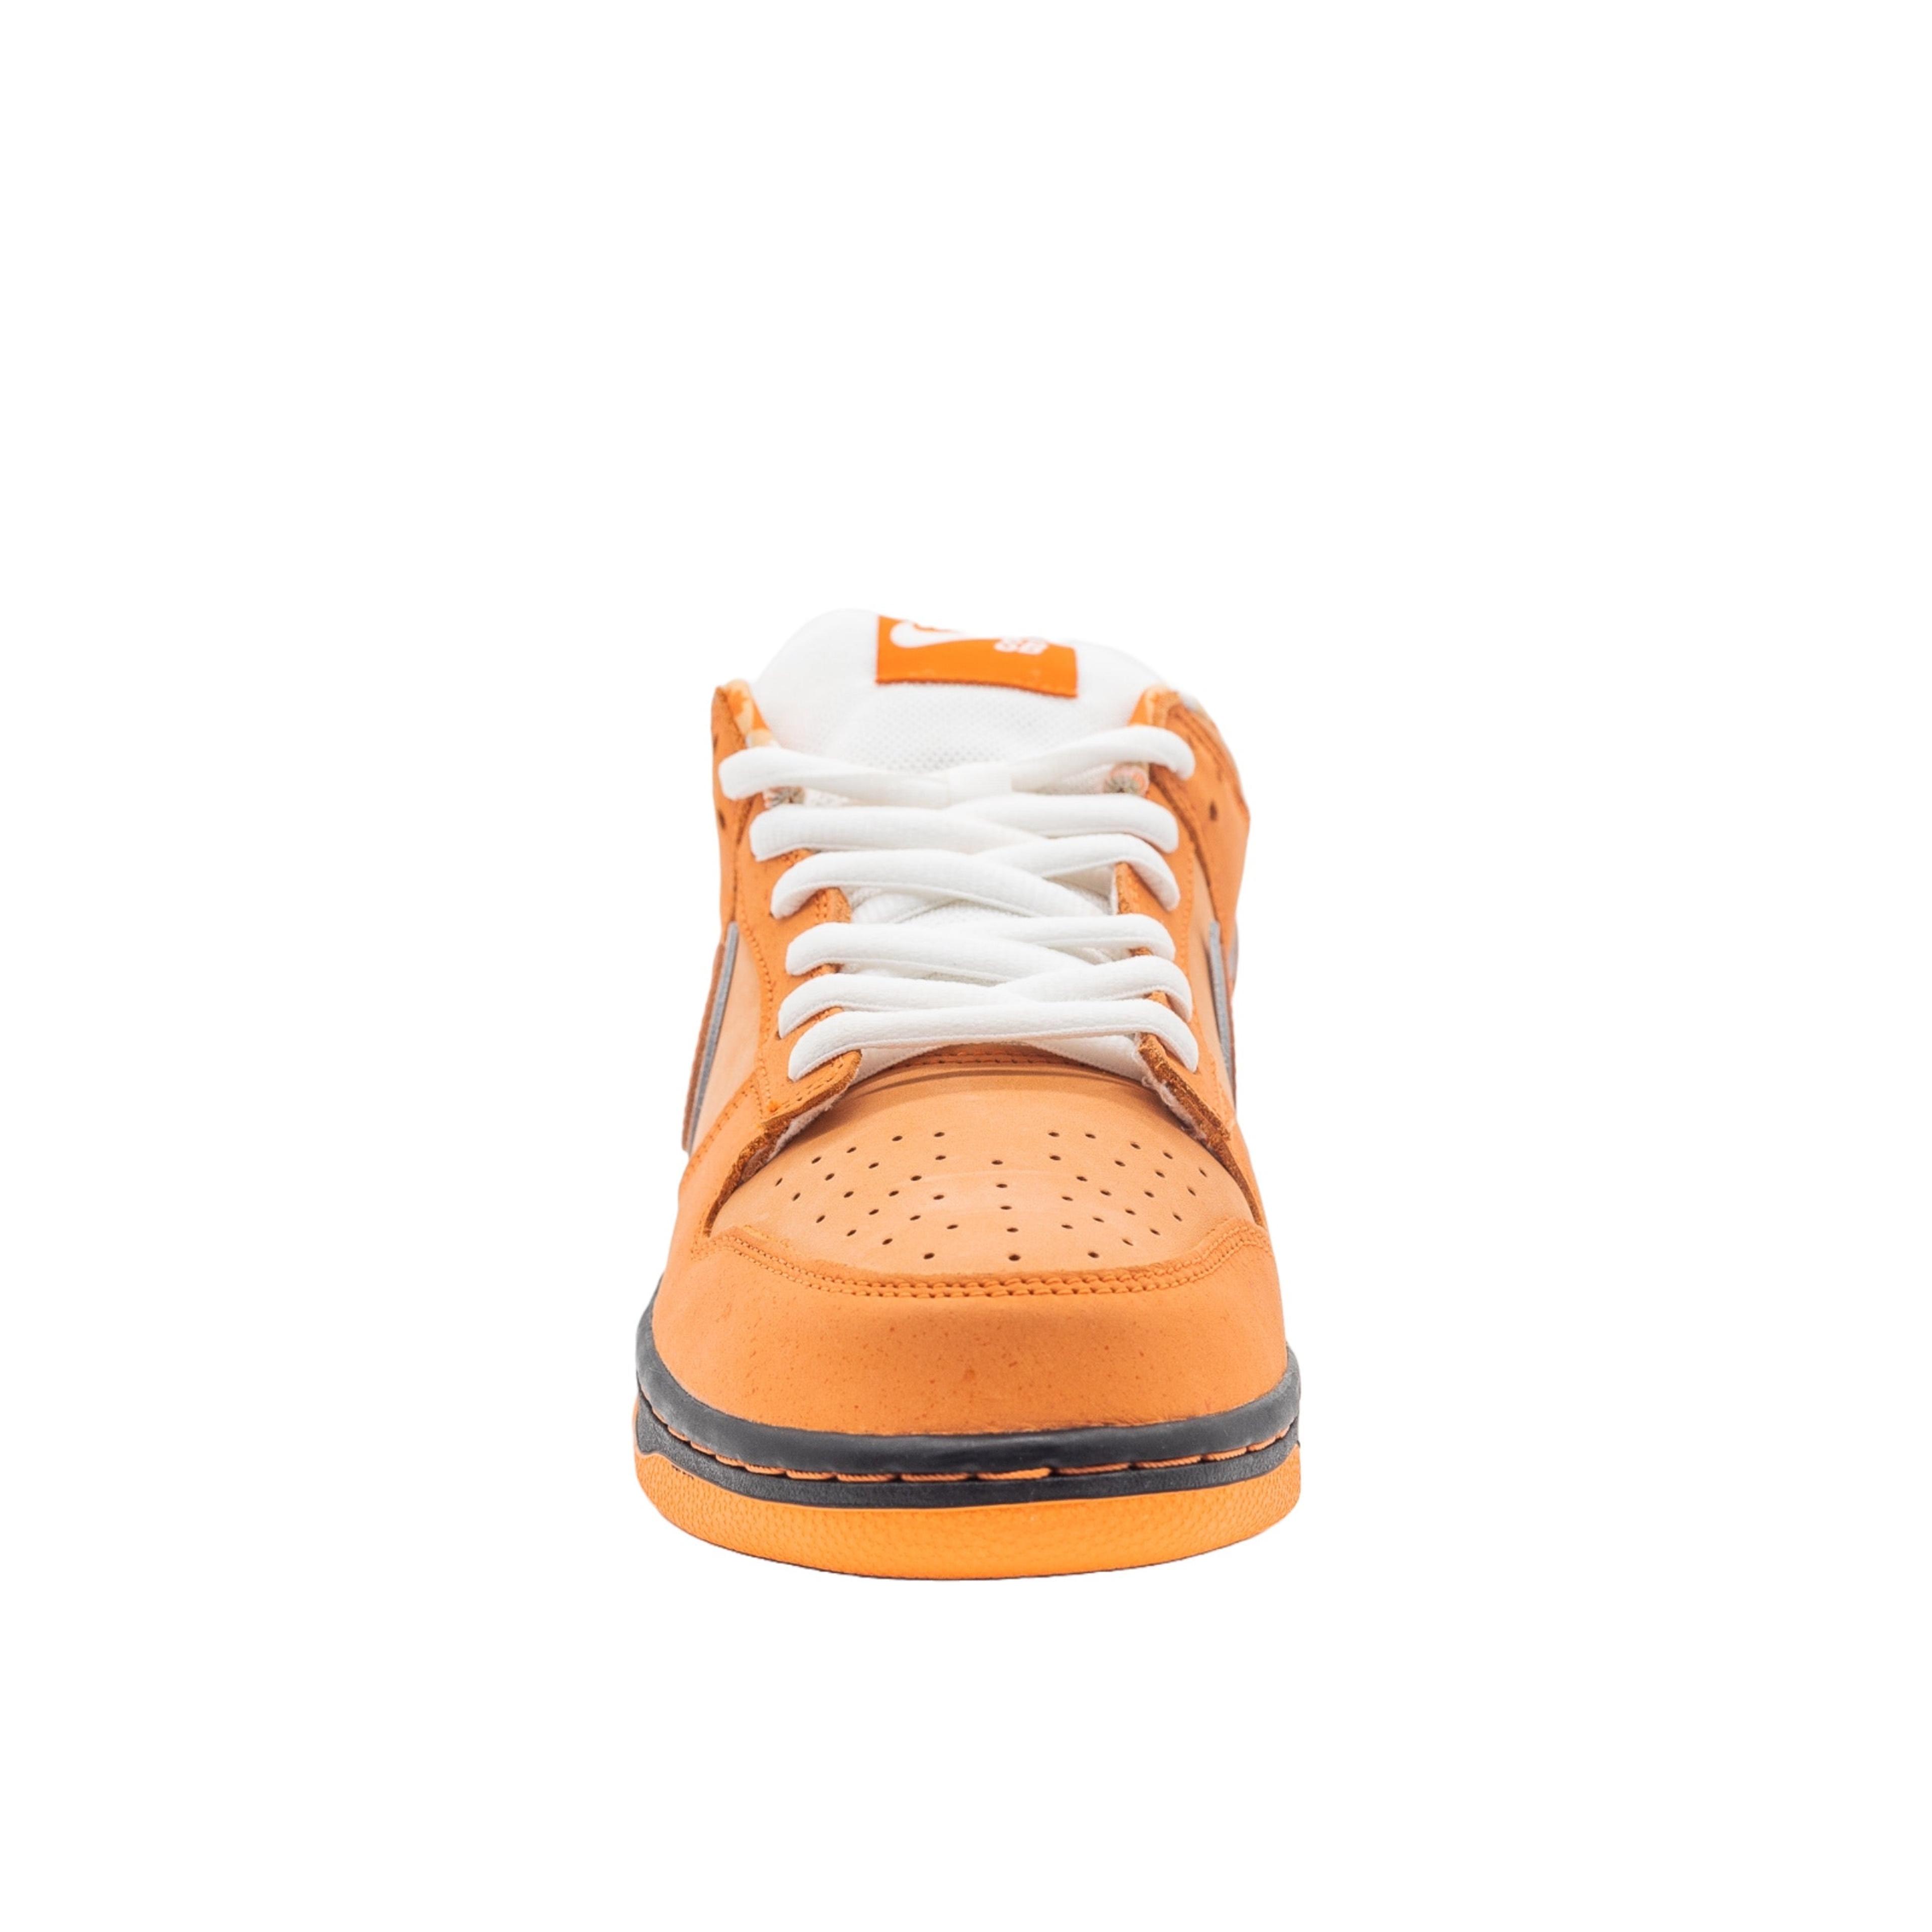 Alternate View 2 of Nike SB Dunk Low, Concepts Orange Lobster (Special Box)